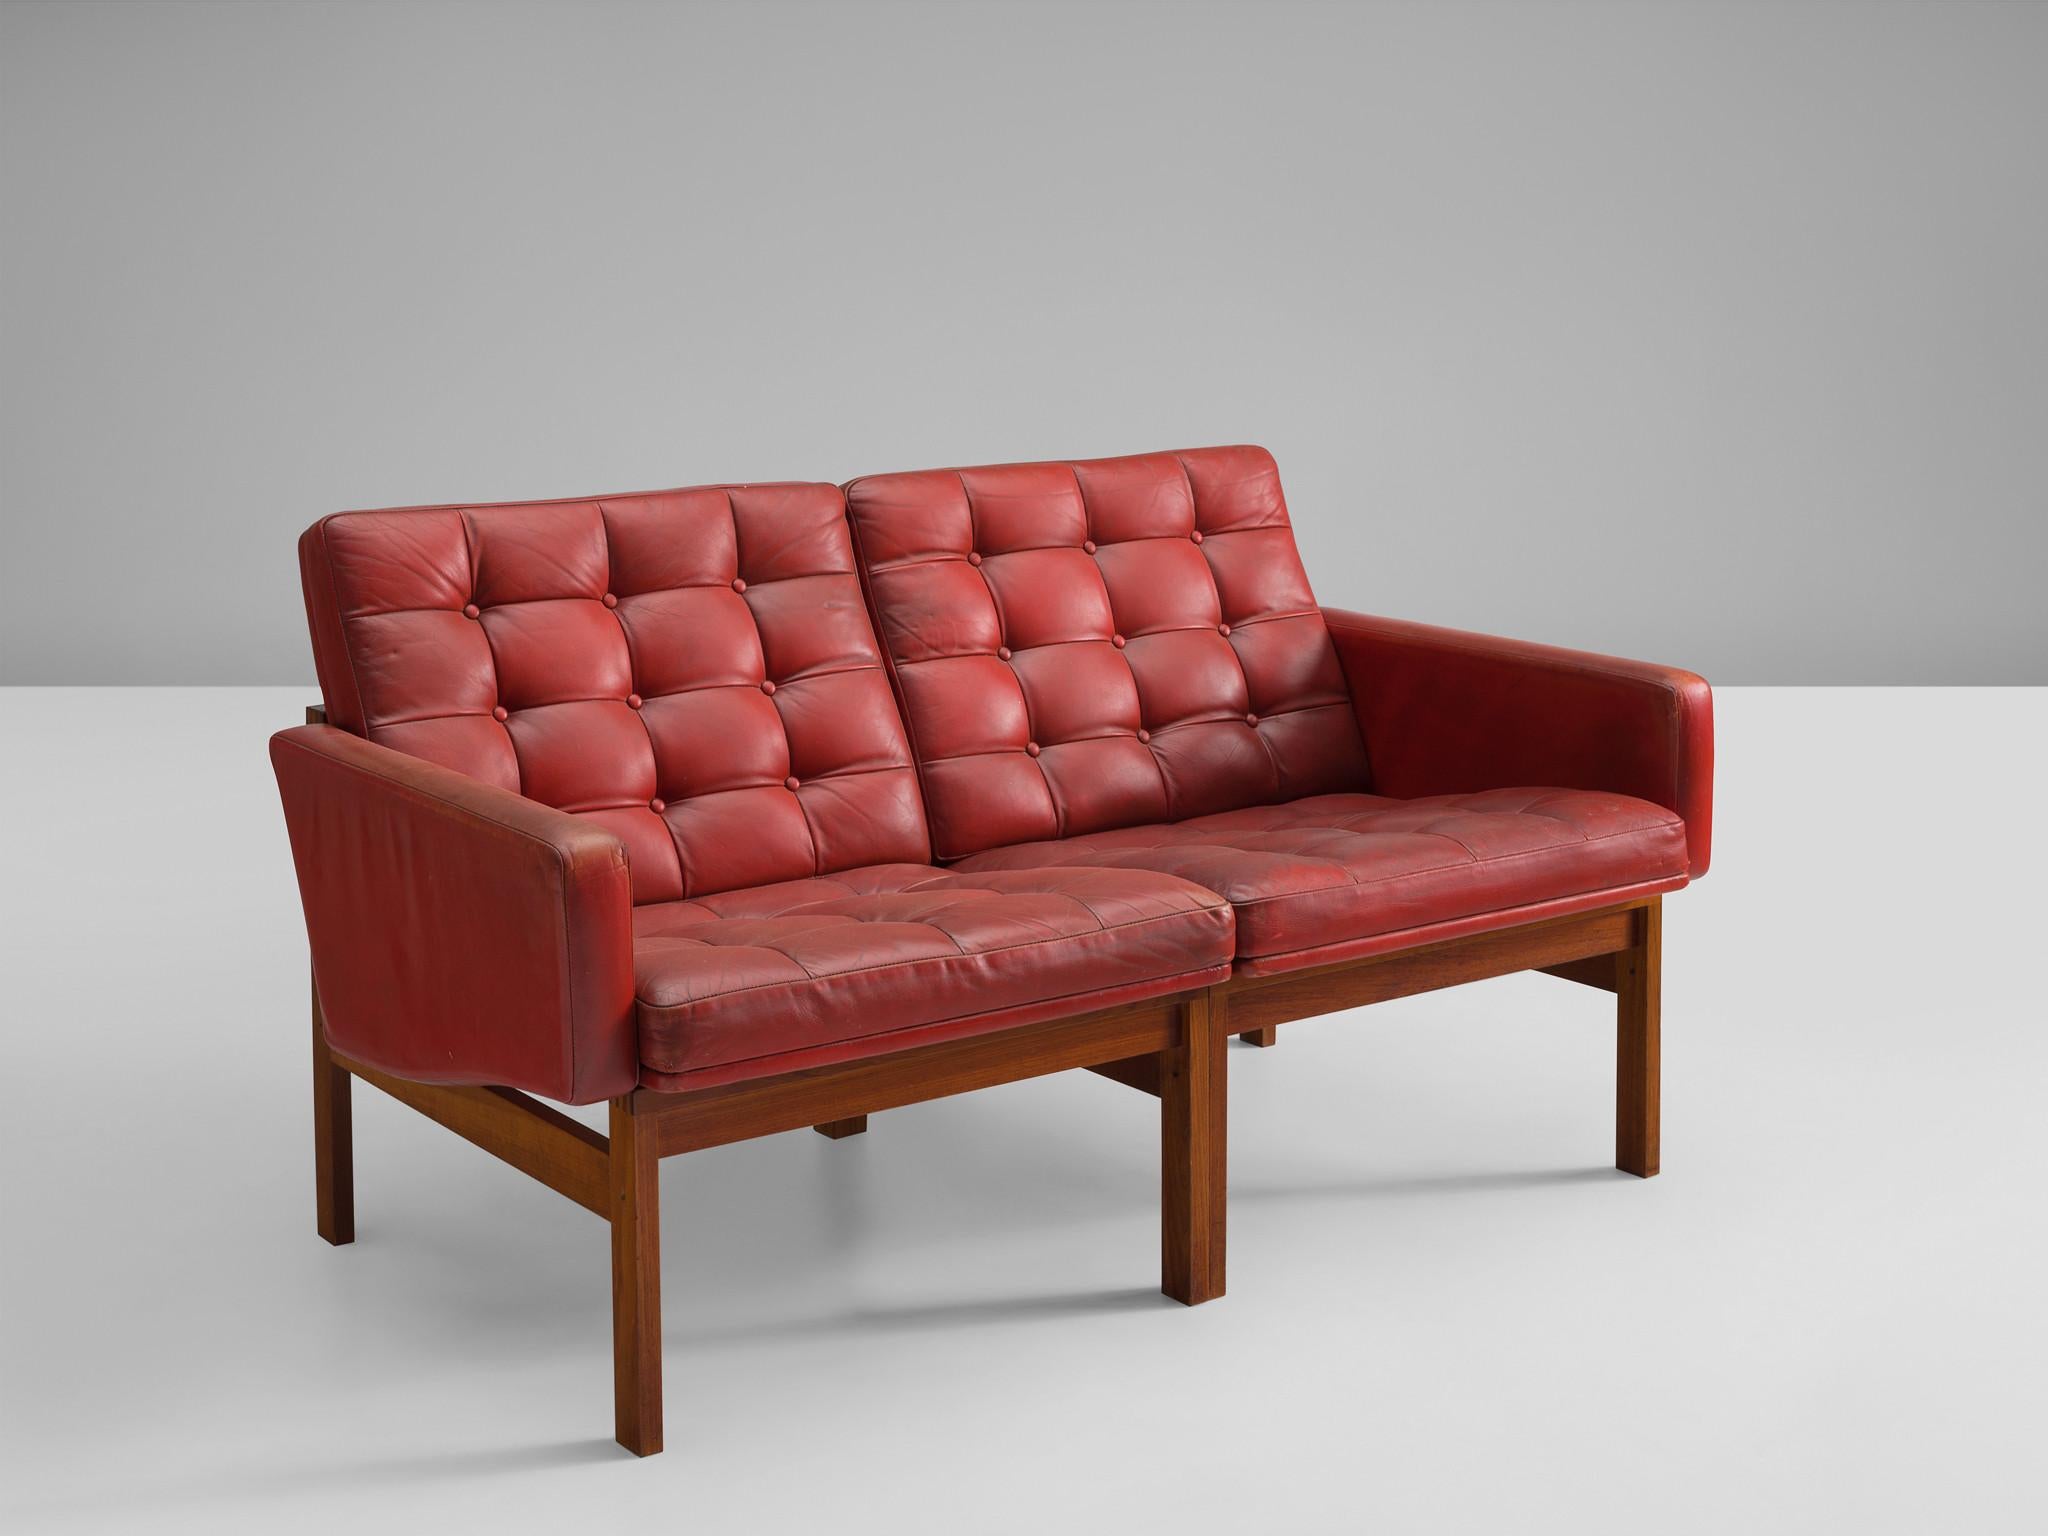 Ole Gjerløv-Knudsen & Torben Lind for France & Søn, two seater sofa, teak, leather, Denmark, 1962 

Modern and beautiful constructed sofa based on a tight and simple design. The teak frame holds a red leather body with buttoned cushions in patinated